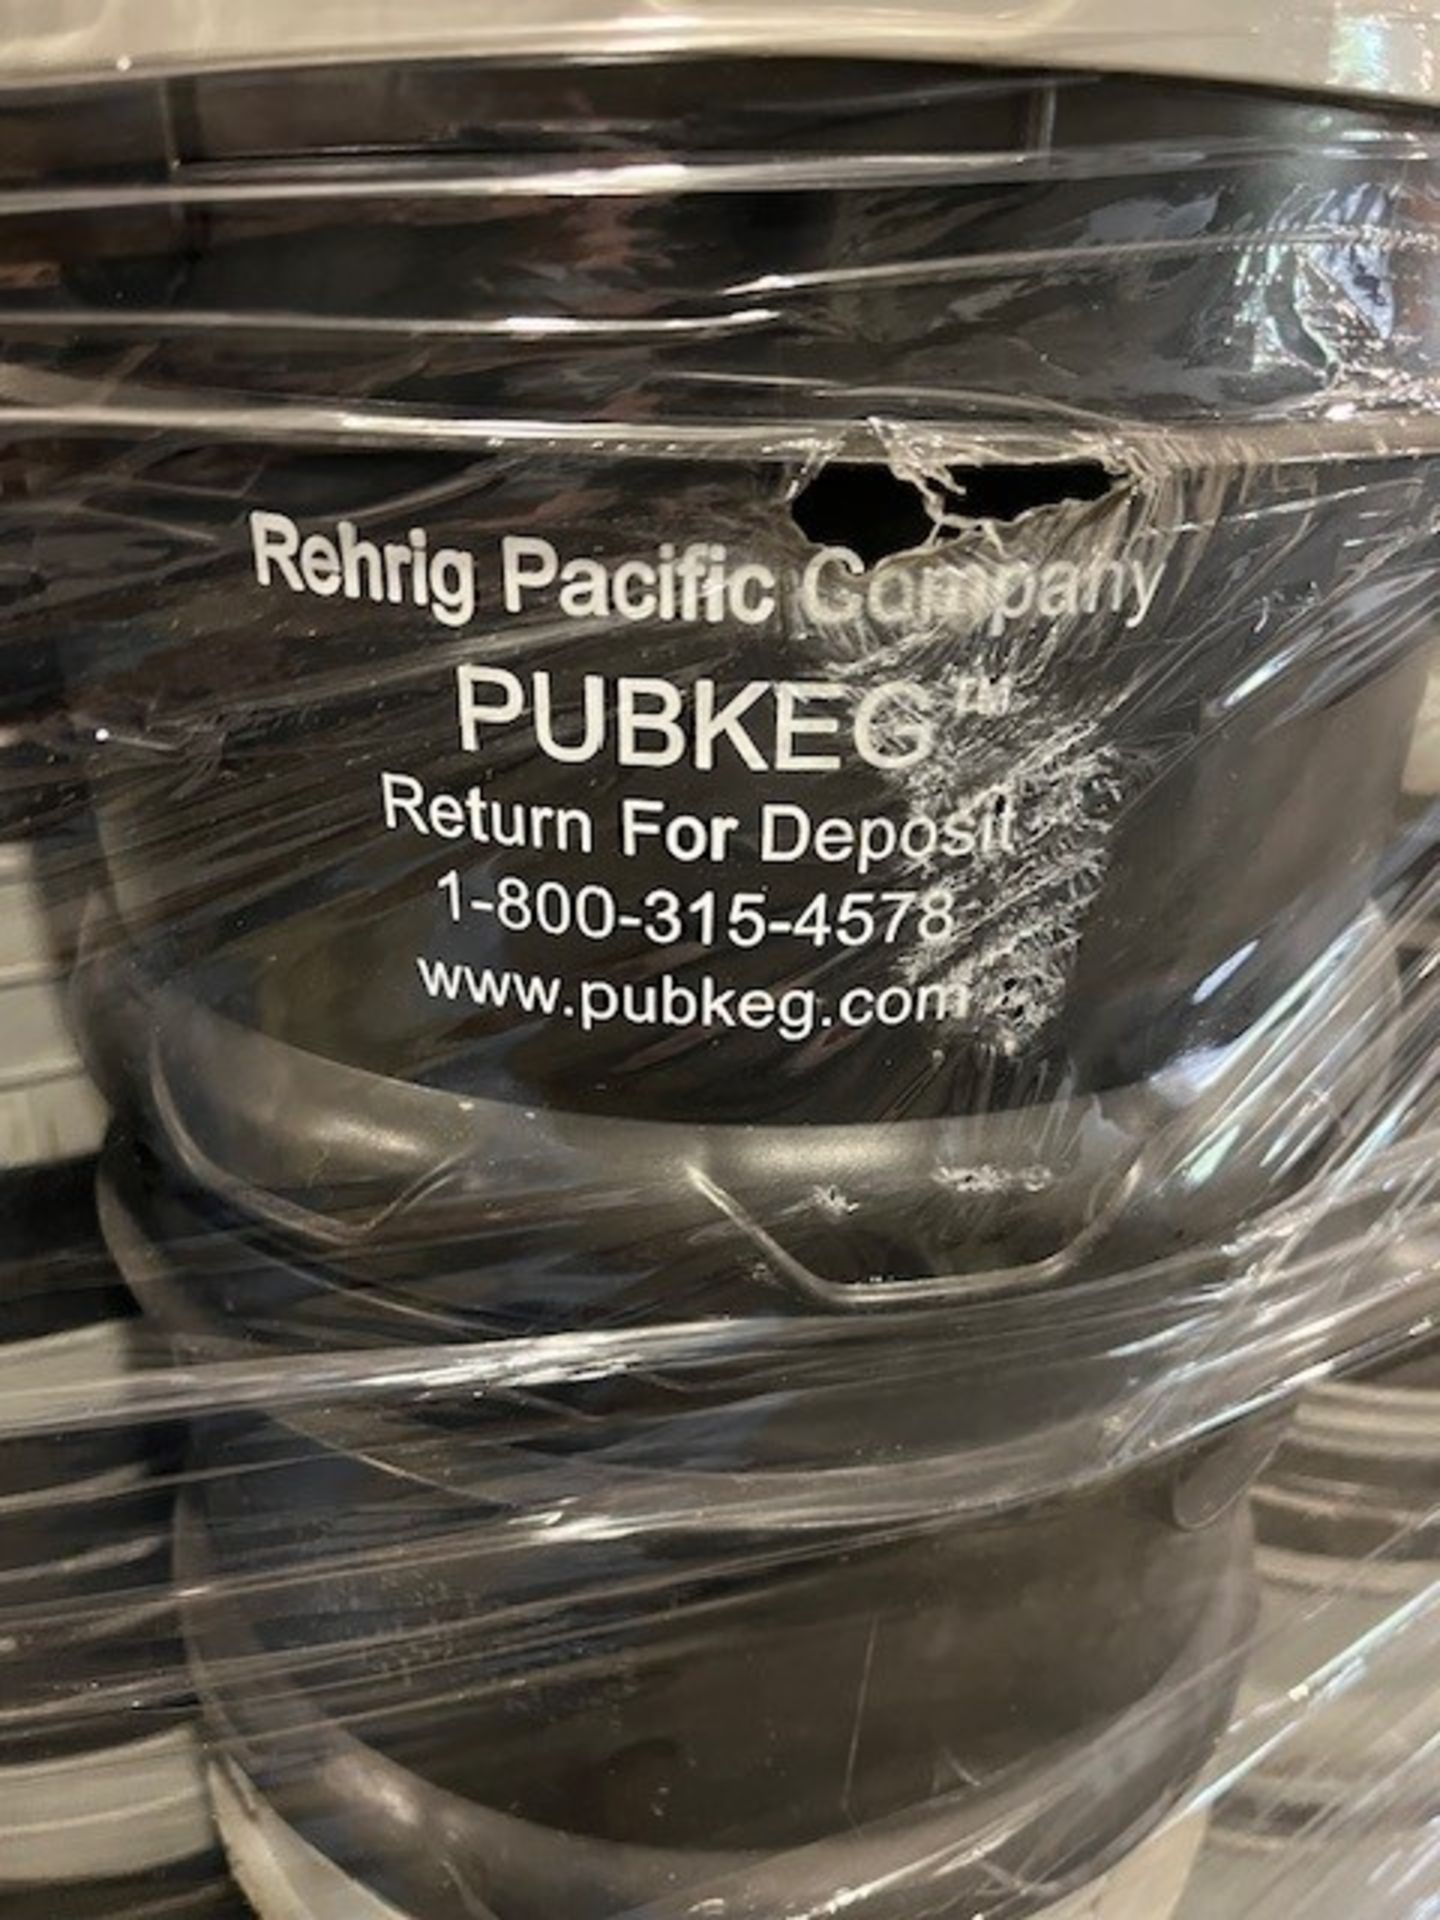 Consignment Item - located in Breese IL: Rehrig Pacific pubkegs - Image 2 of 2